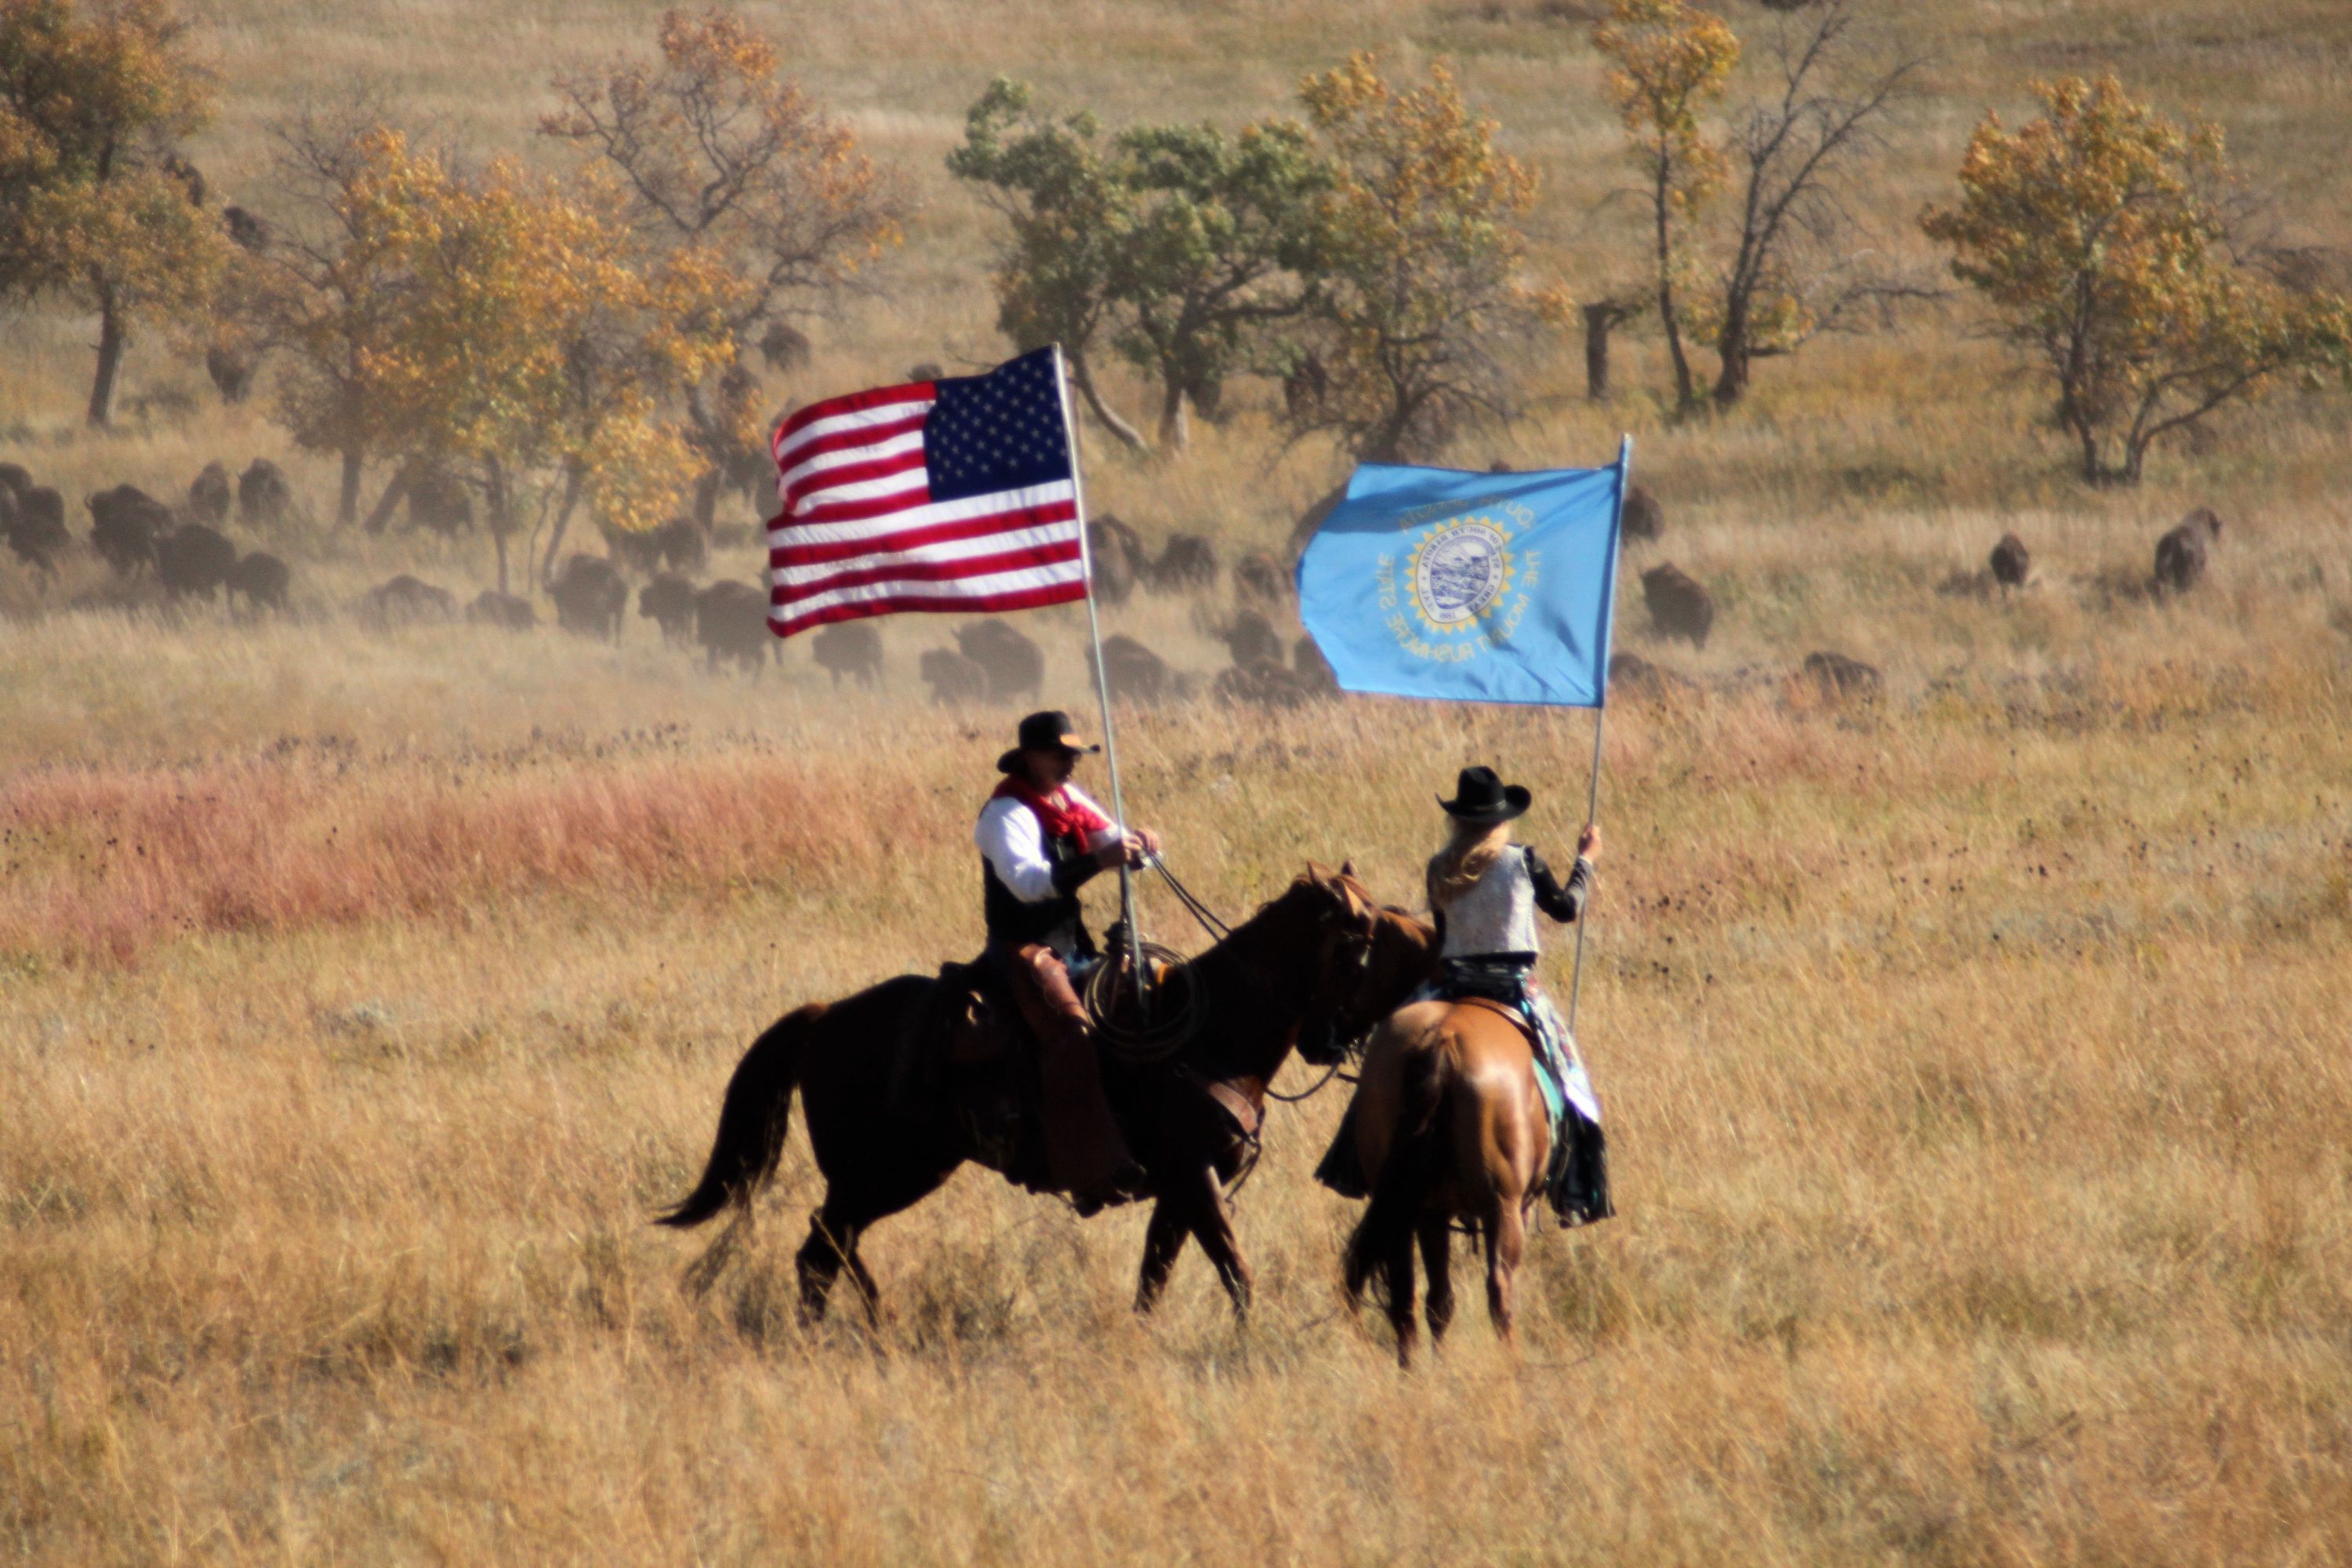 Tim Giago: South Dakota continues to ignore history with annual buffalo roundup